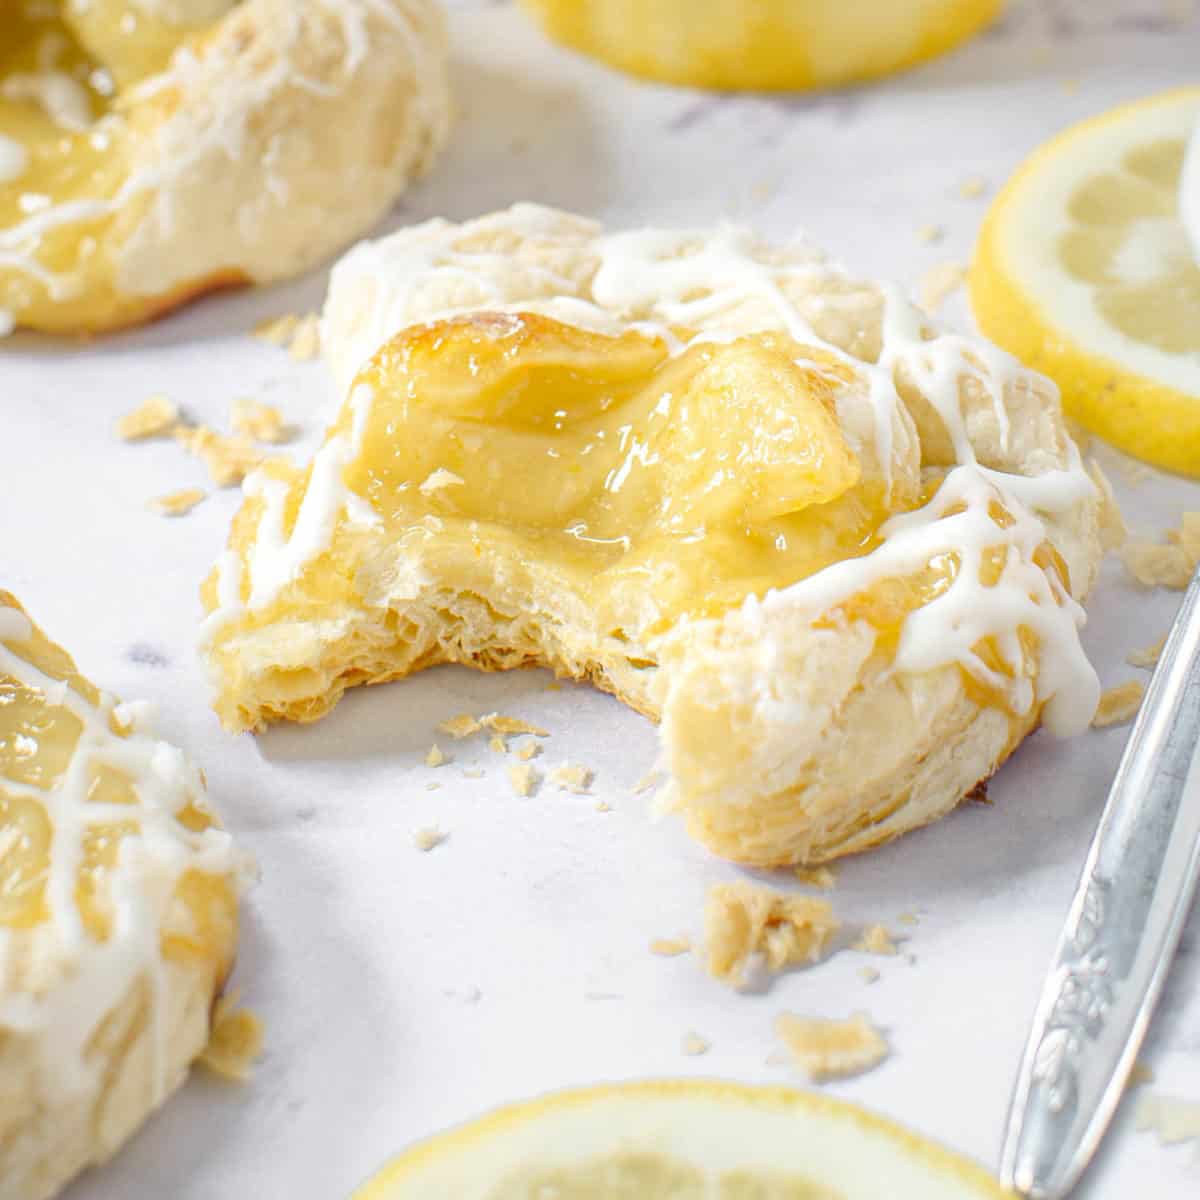 A close up of a lemon curd puff pastry with a bite taken out of it.